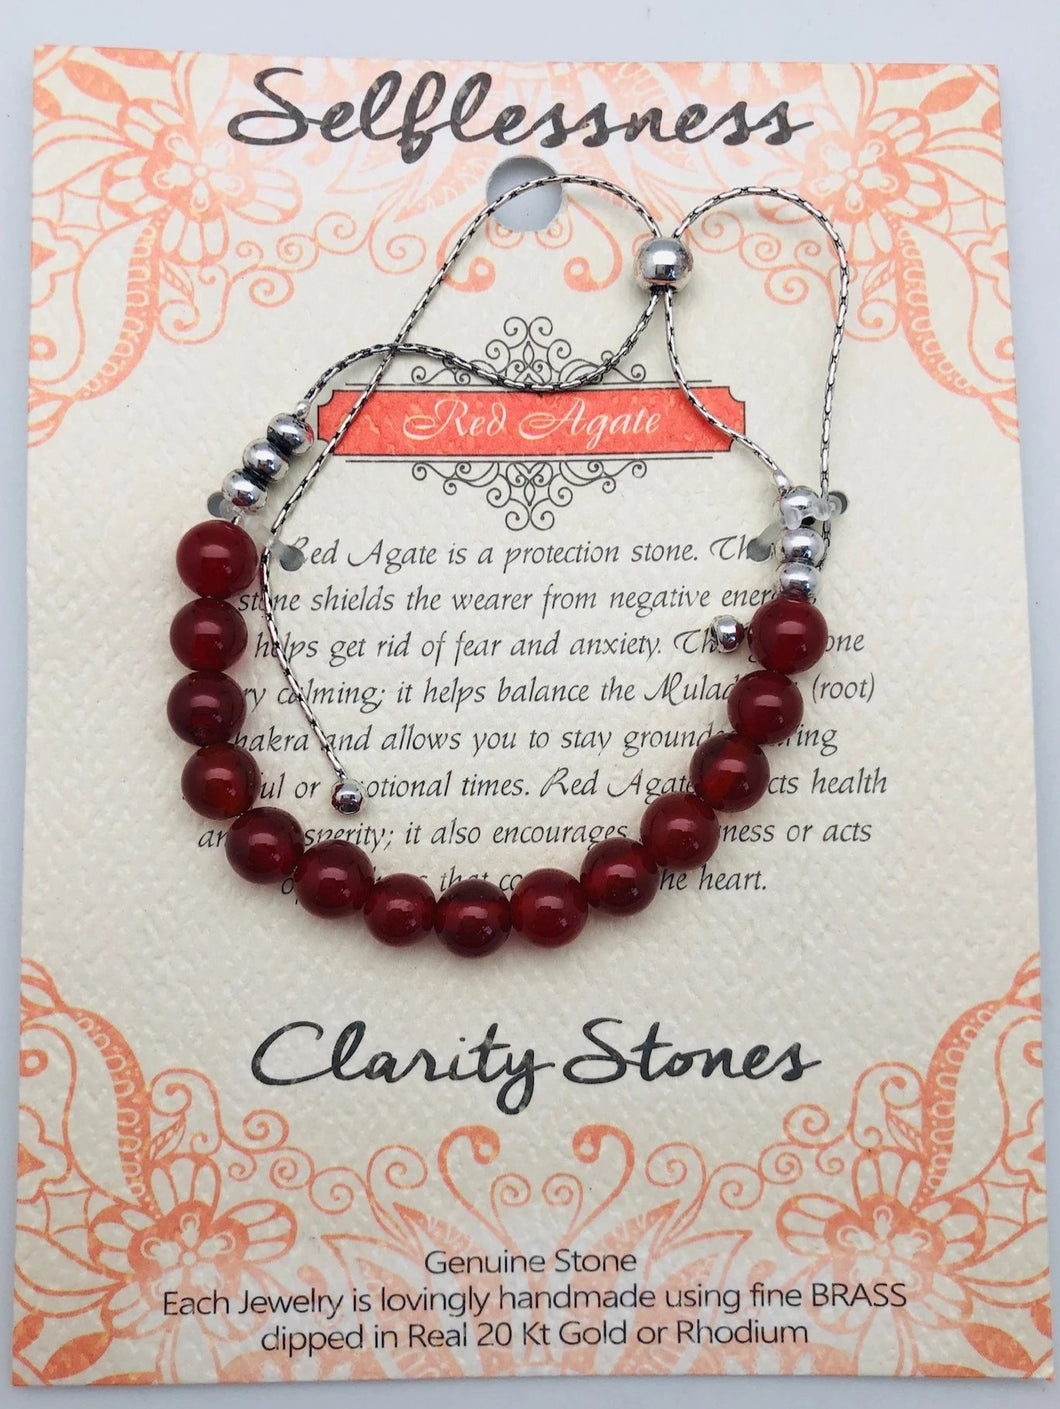 Red Agate Clarity Stone Bracelet Selflessness and Peace